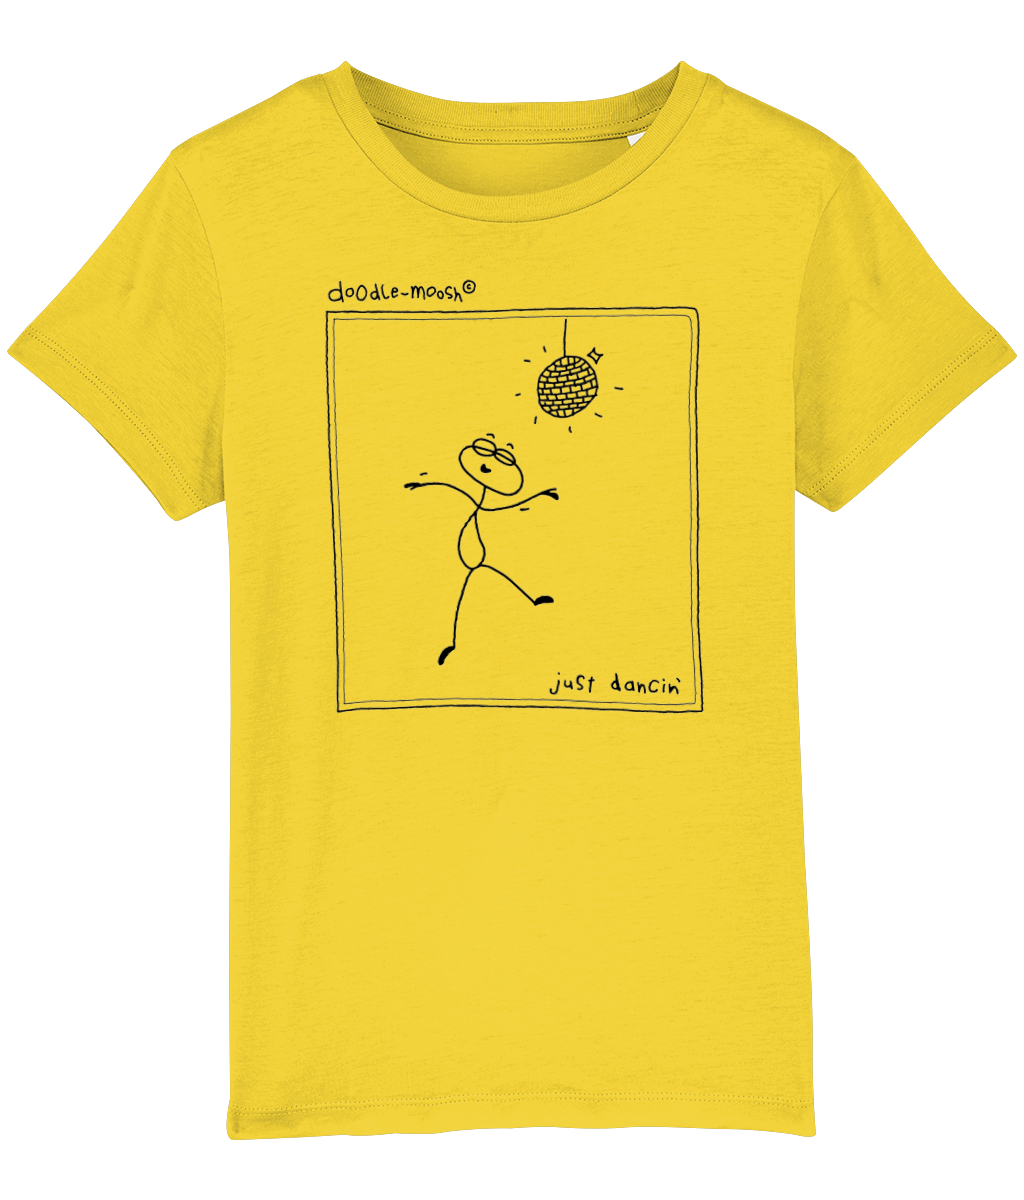 Just dancing t-shirt, yellow with black